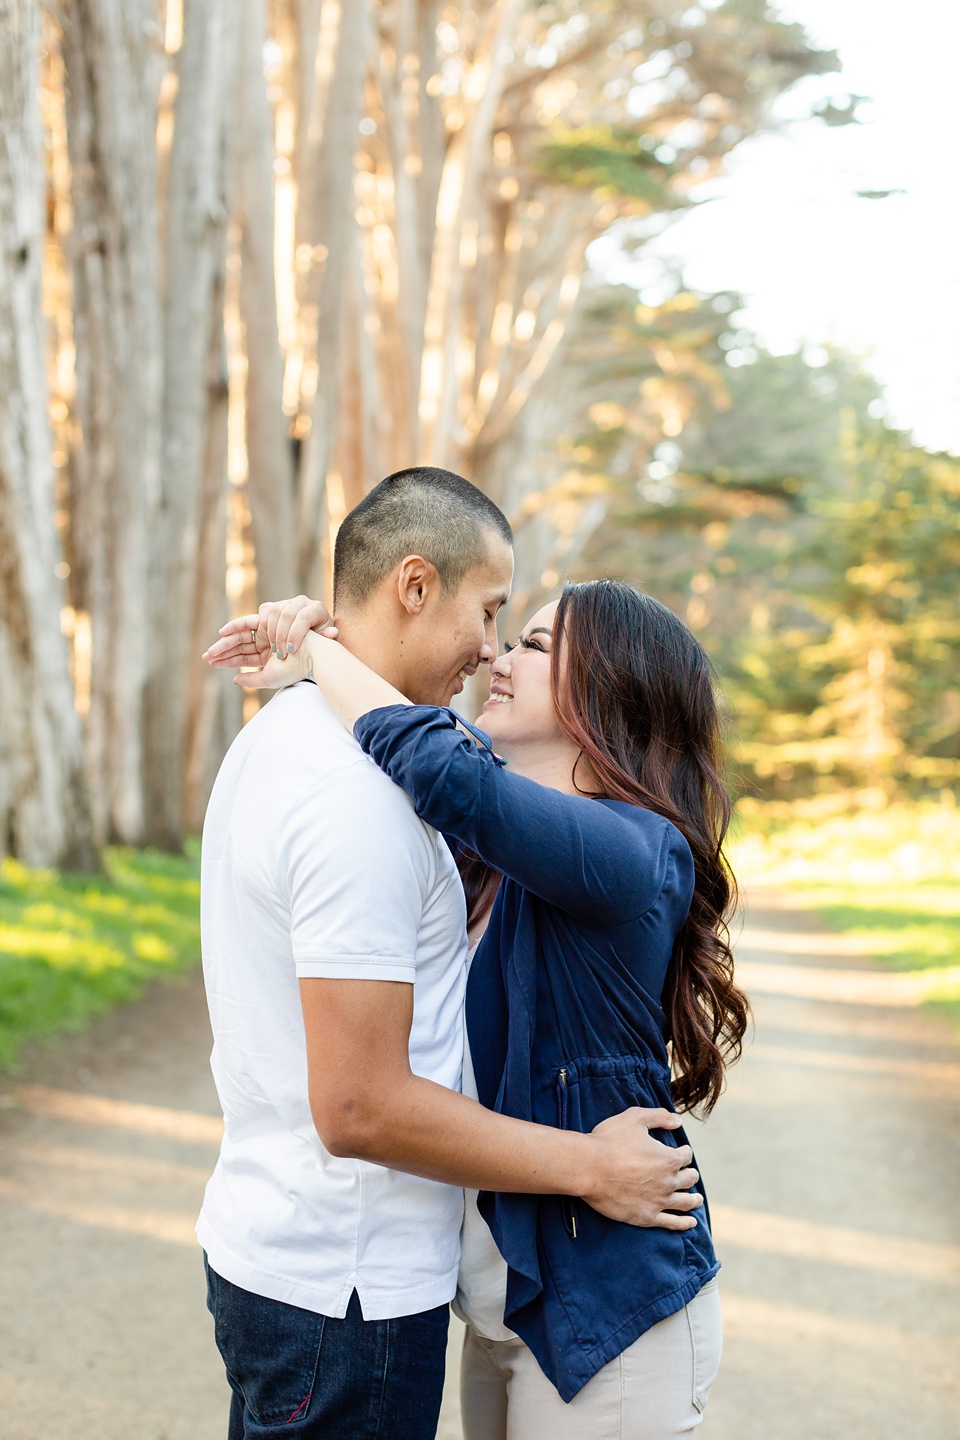 Engagement Photos: 5 Reasons You Need Them! Plus Poses, Tips & Outfit  Ideas! - Chronicles of Kae